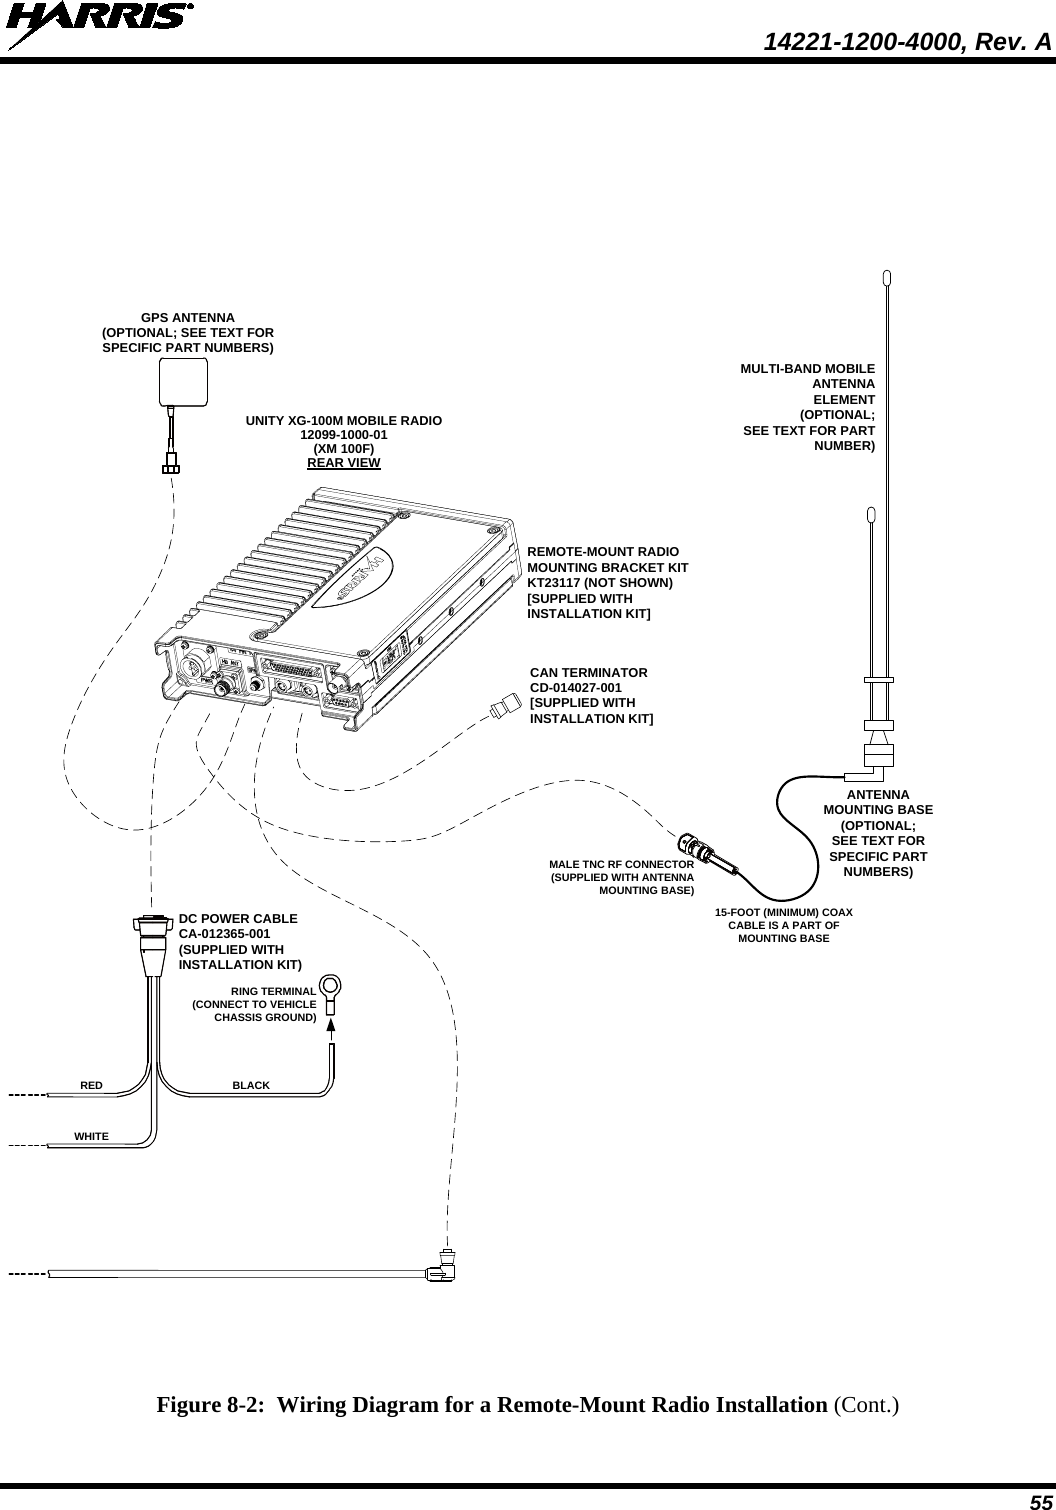  14221-1200-4000, Rev. A  55  Figure 8-2:  Wiring Diagram for a Remote-Mount Radio Installation (Cont.)  DC POWER CABLECA-012365-001(SUPPLIED WITH INSTALLATION KIT)RING TERMINAL (CONNECT TO VEHICLE CHASSIS GROUND)BLACKREDWHITEUNITY XG-100M MOBILE RADIO12099-1000-01(XM 100F)REAR VIEWMULTI-BAND MOBILEANTENNAELEMENT(OPTIONAL;SEE TEXT FOR PART NUMBER)MALE TNC RF CONNECTOR(SUPPLIED WITH ANTENNA MOUNTING BASE)CAN TERMINATORCD-014027-001[SUPPLIED WITH INSTALLATION KIT]GPS ANTENNA(OPTIONAL; SEE TEXT FOR SPECIFIC PART NUMBERS)REMOTE-MOUNT RADIO MOUNTING BRACKET KITKT23117 (NOT SHOWN)[SUPPLIED WITH INSTALLATION KIT]ANTENNAMOUNTING BASE (OPTIONAL;SEE TEXT FOR SPECIFIC PART NUMBERS)15-FOOT (MINIMUM) COAX CABLE IS A PART OF MOUNTING BASE